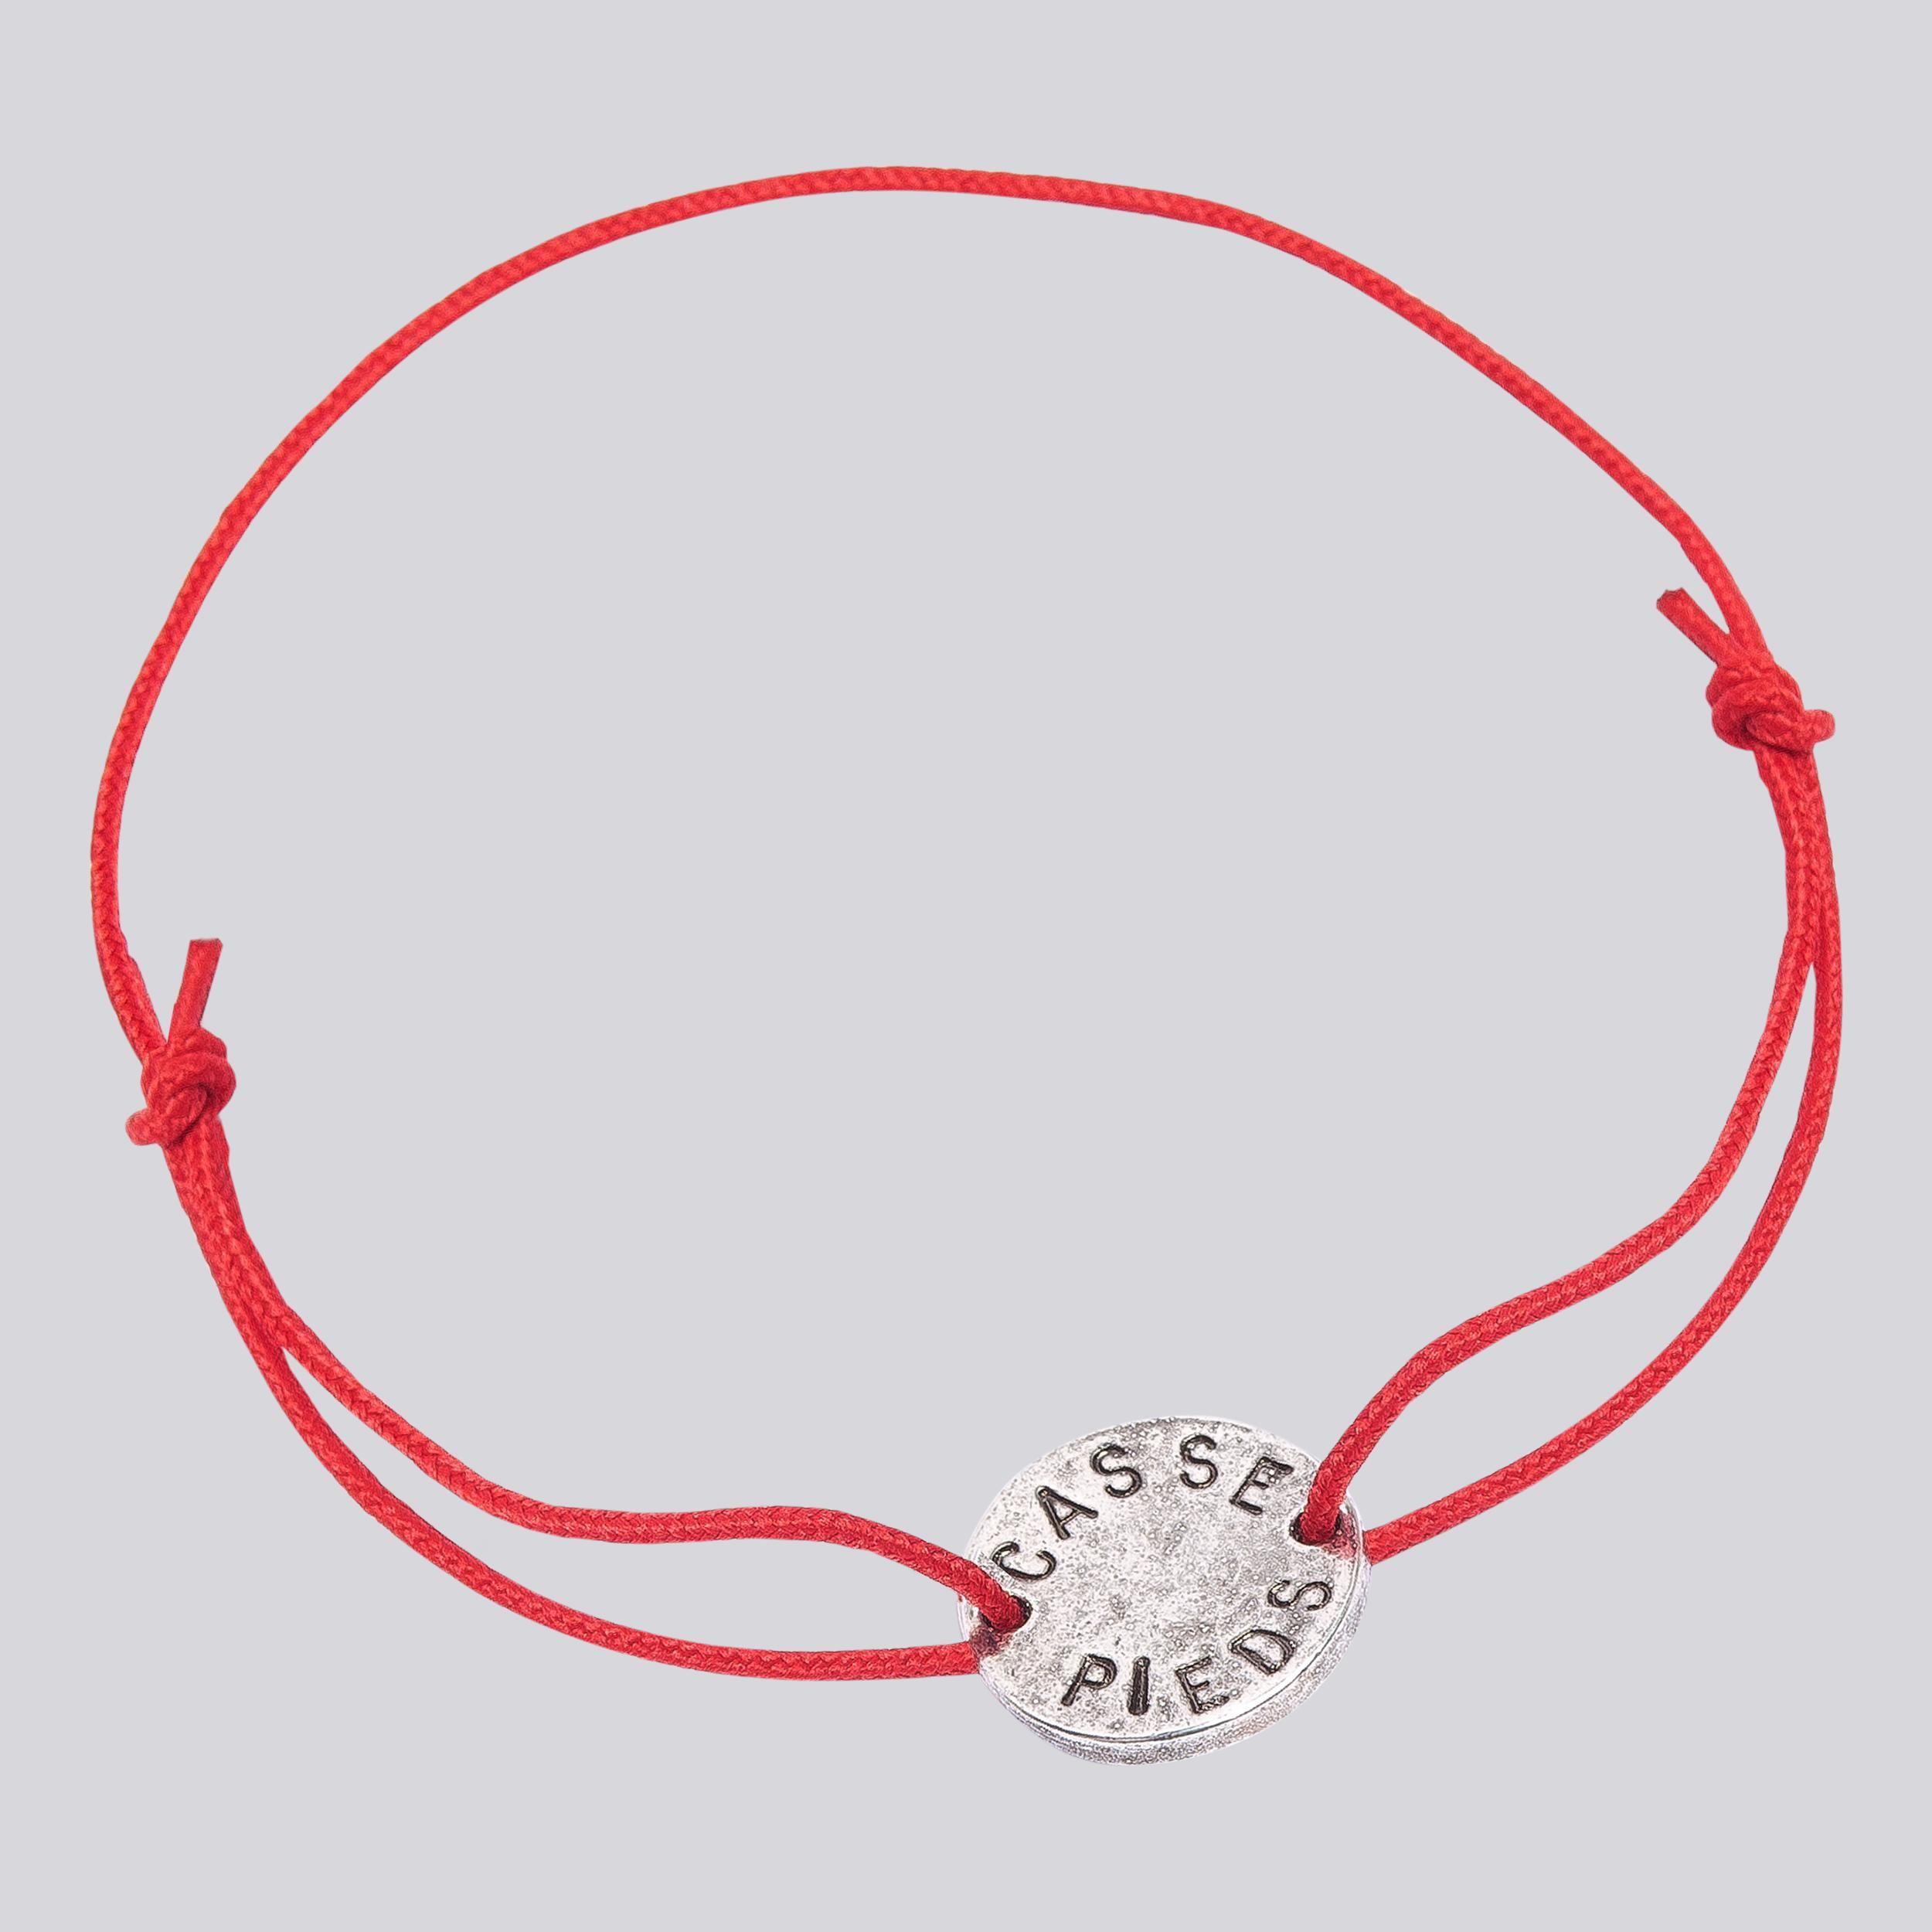 B in Red Circle Logo - Agnes B. Red Casse Pieds Bracelet in Red